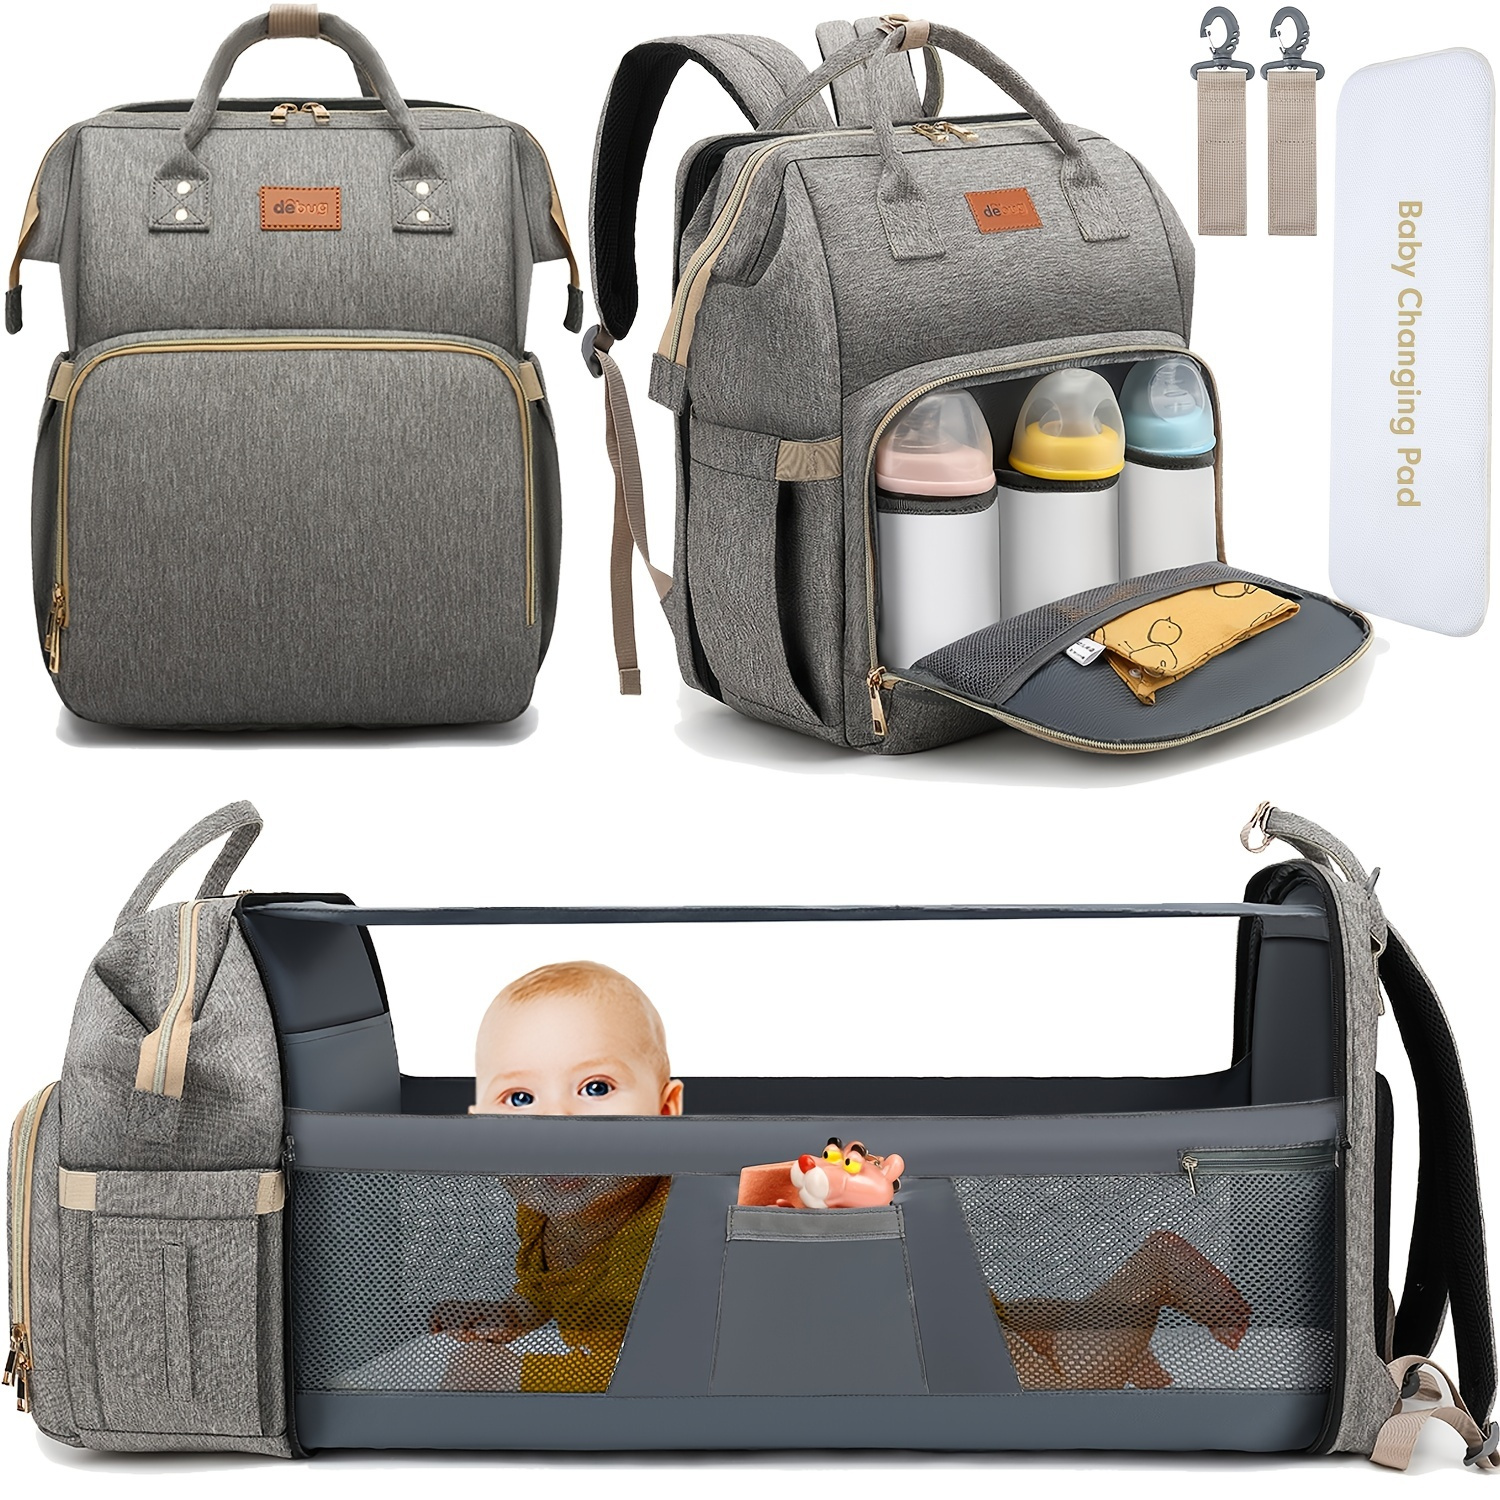 3 in 1 Baby Diaper Bag Backpack with Changing Station for Boy Girl  Waterproof